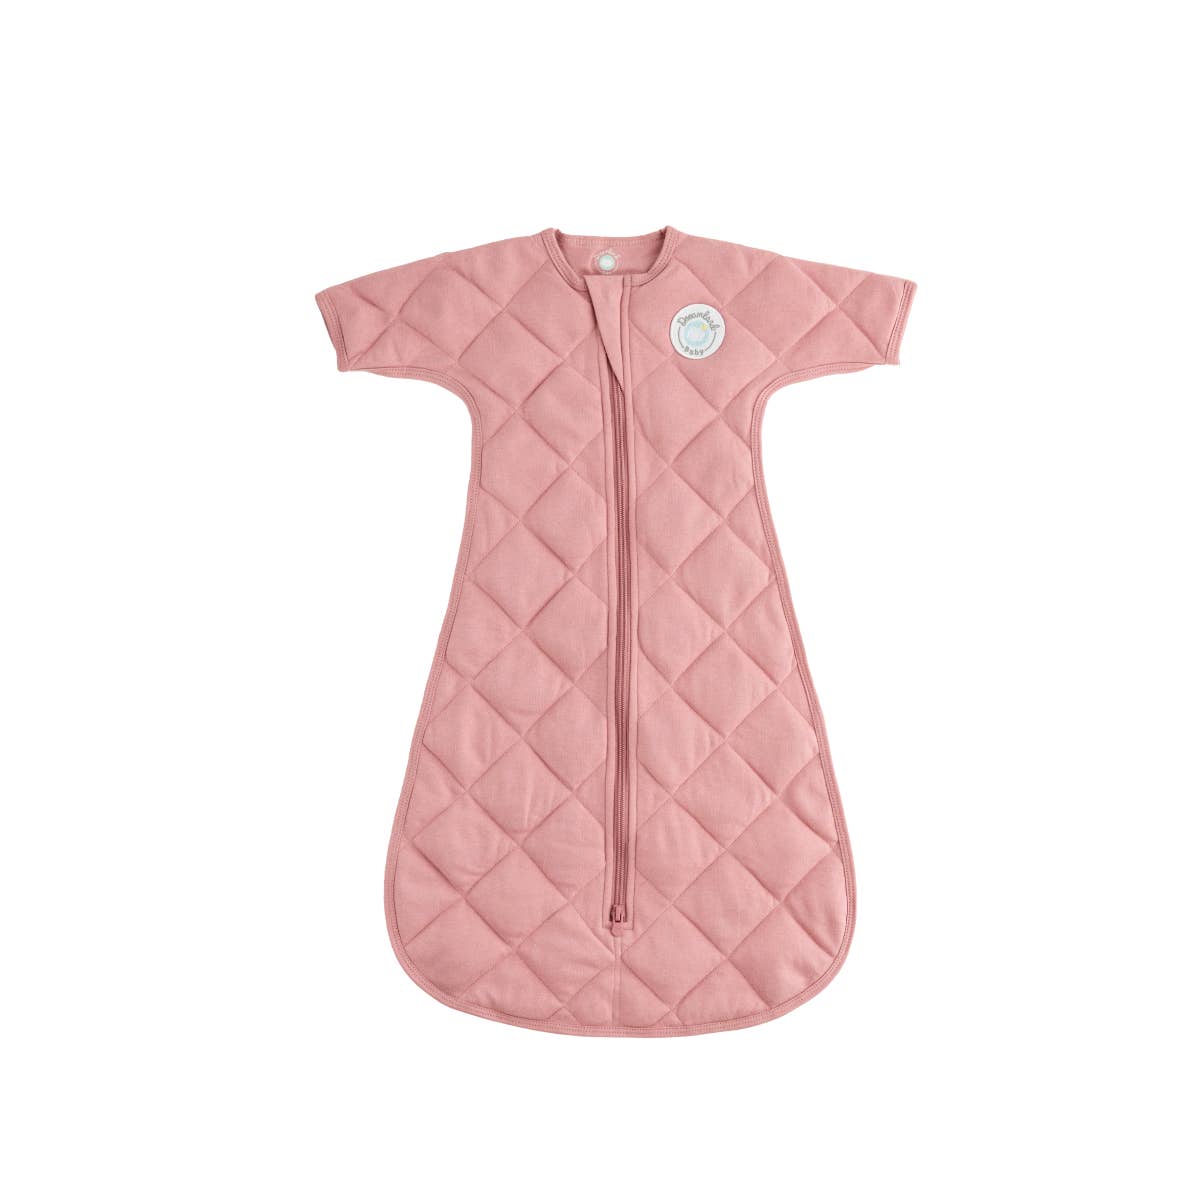 Dream Weighted Transition Swaddle - Dusty Rose